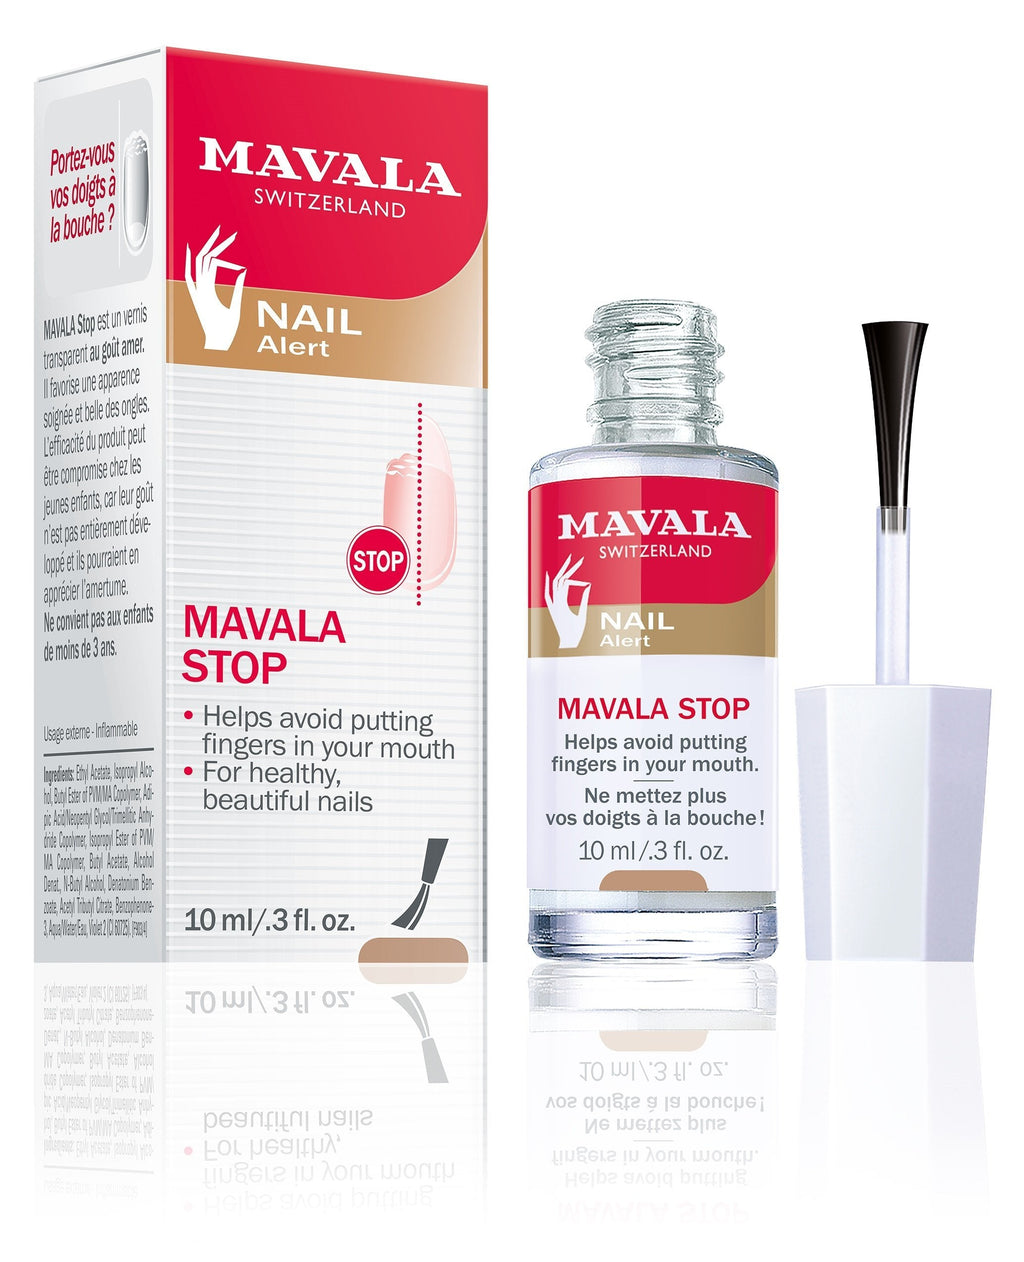 [Australia] - Mavala Stop Deterrent Nail Polish Treatment | Nail Care to Help Stop Putting Fingers In Your Mouth | For Ages 3+ | 0.3 Fl Oz 0.3 Fl Oz (Pack of 1) 